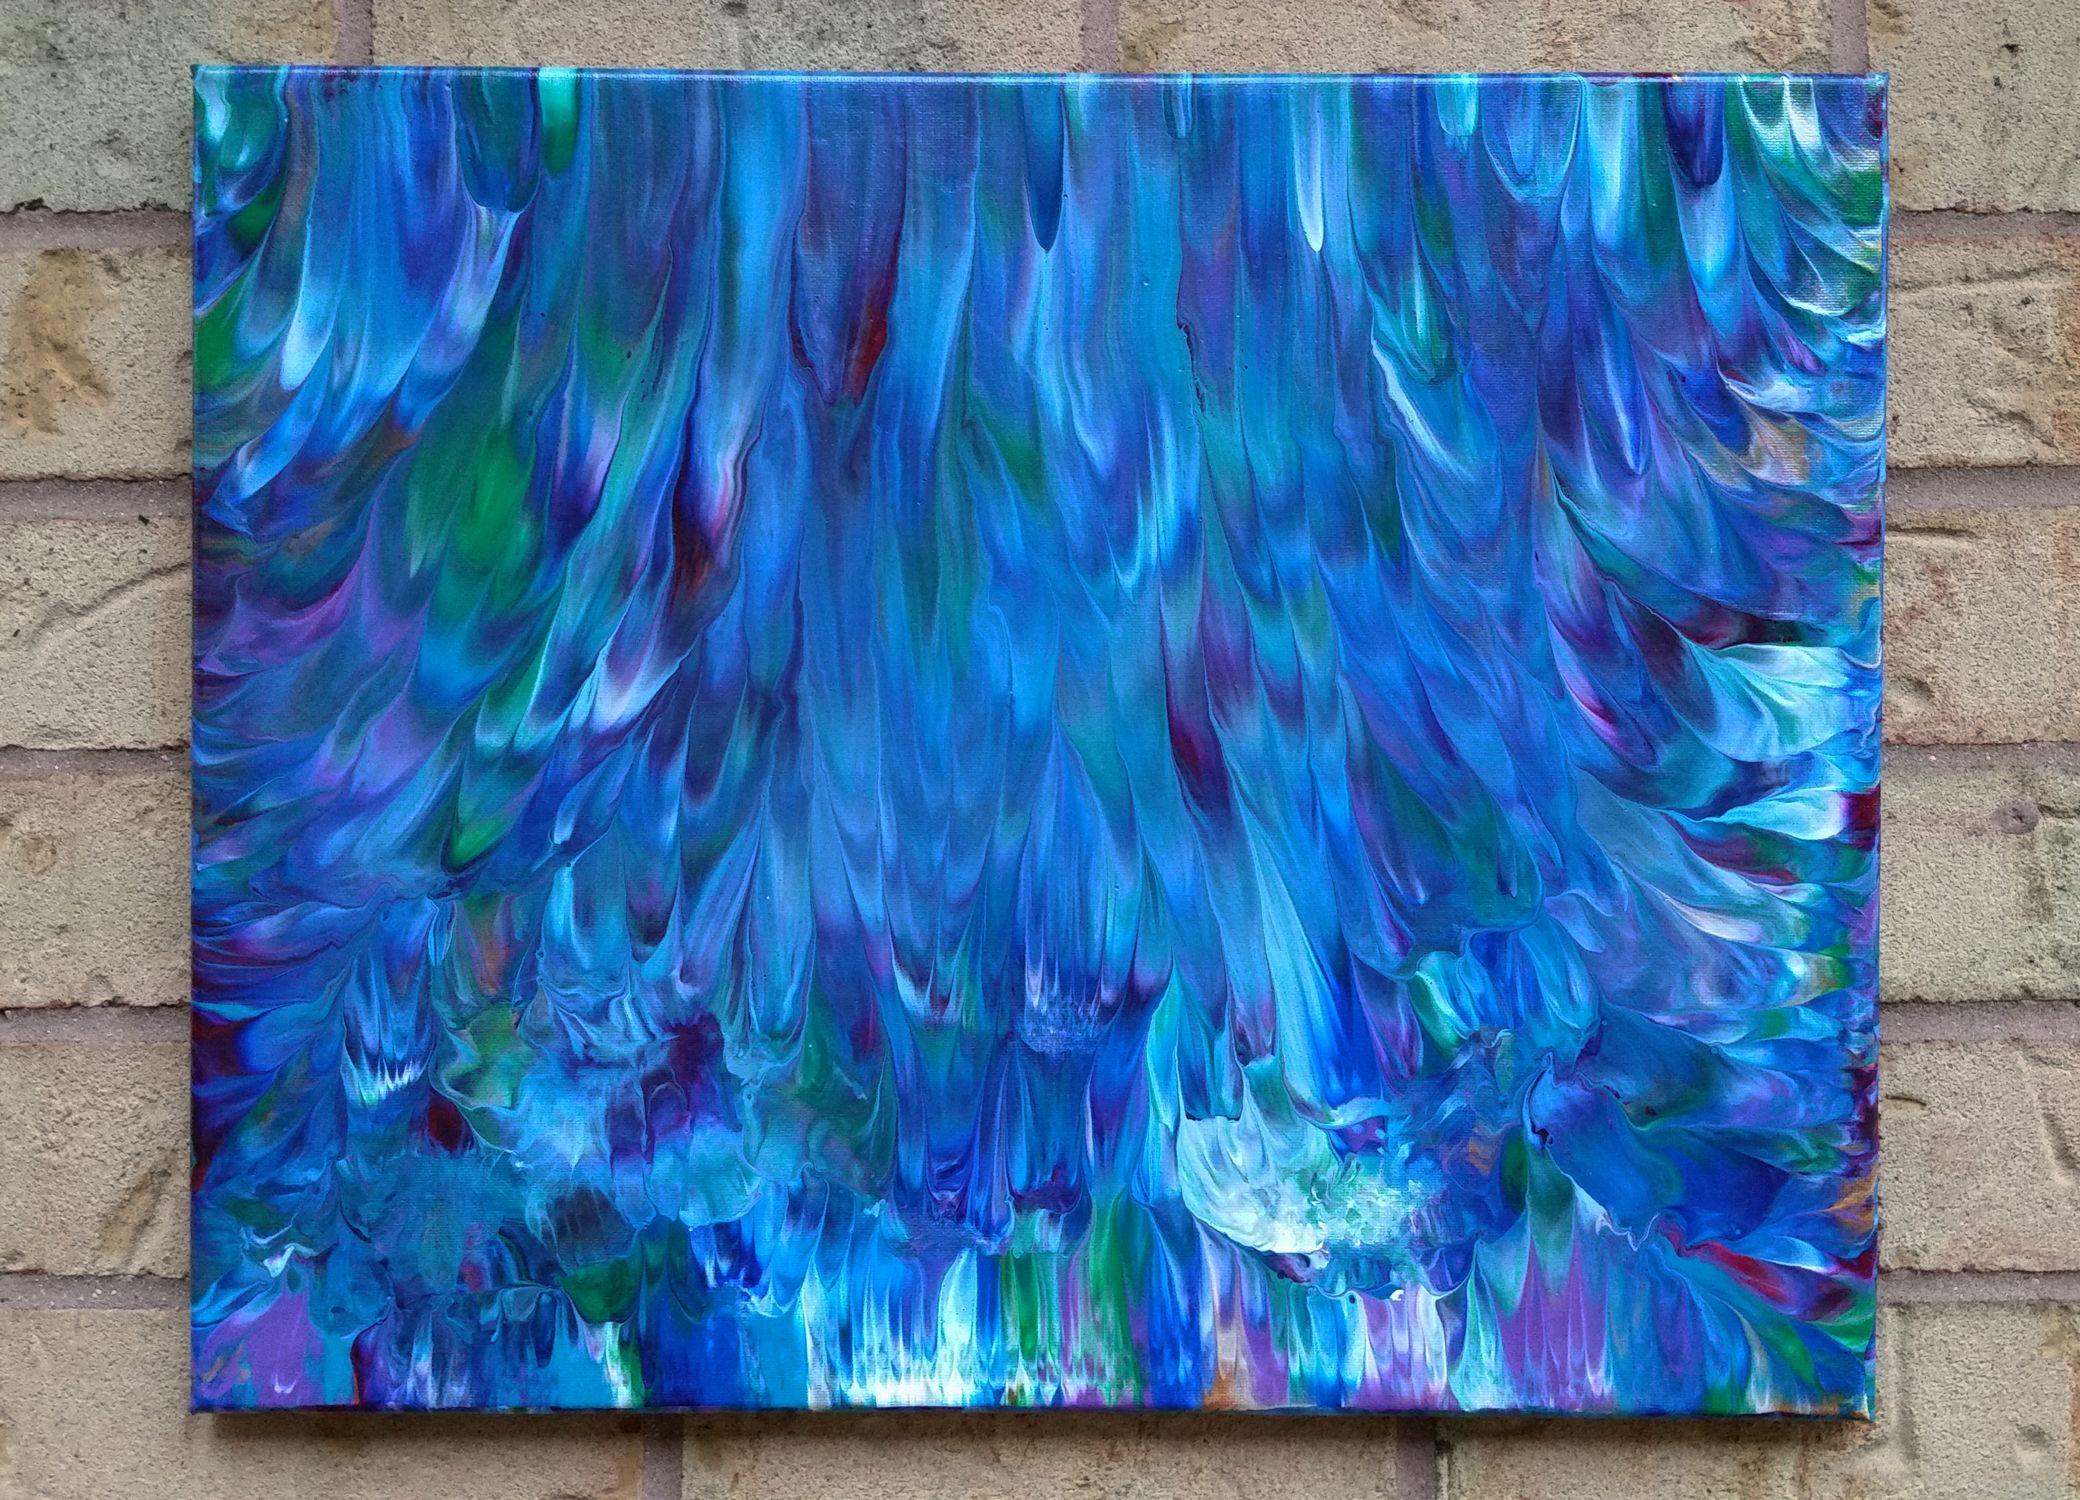 Breath of Fresh Air II is a calming original abstract painting with a cool and refreshing color scheme, beautiful movement, unique textures and a high gloss finish.     Original Abstract Painting (Created in 2017)  Acrylic on Canvas  20